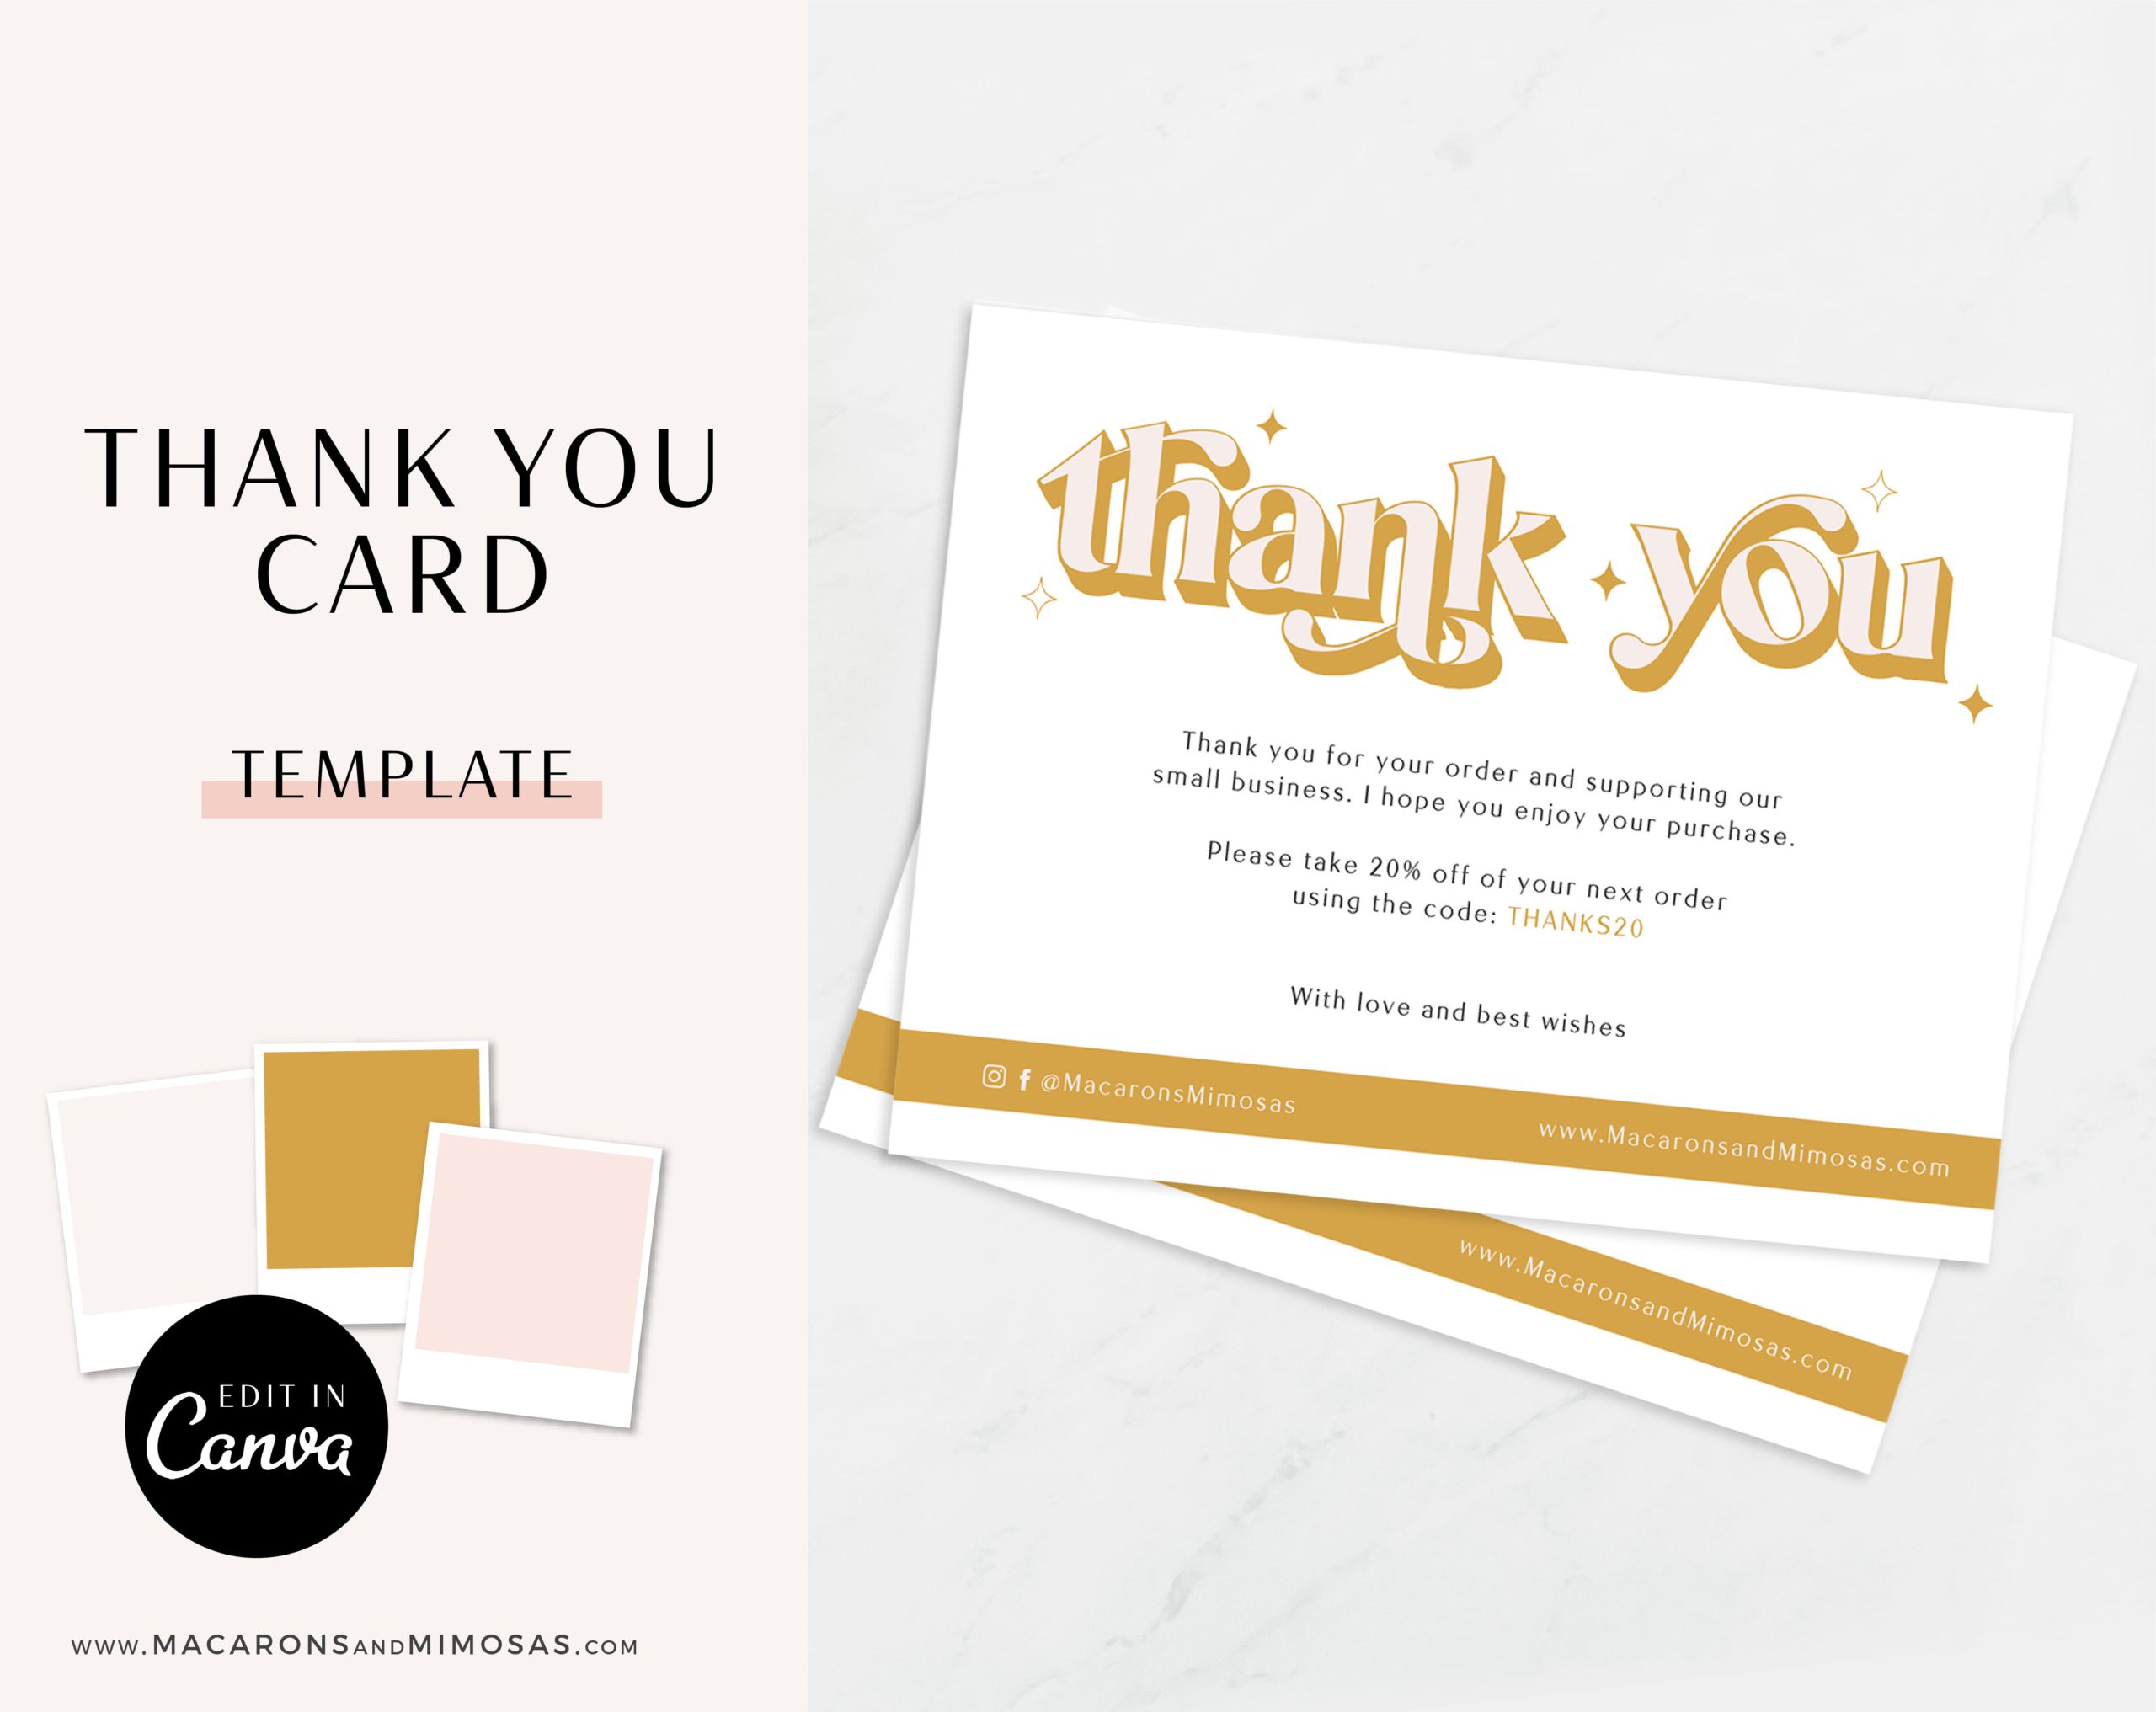 Watercolor Thank You Cards - Houseful of Handmade